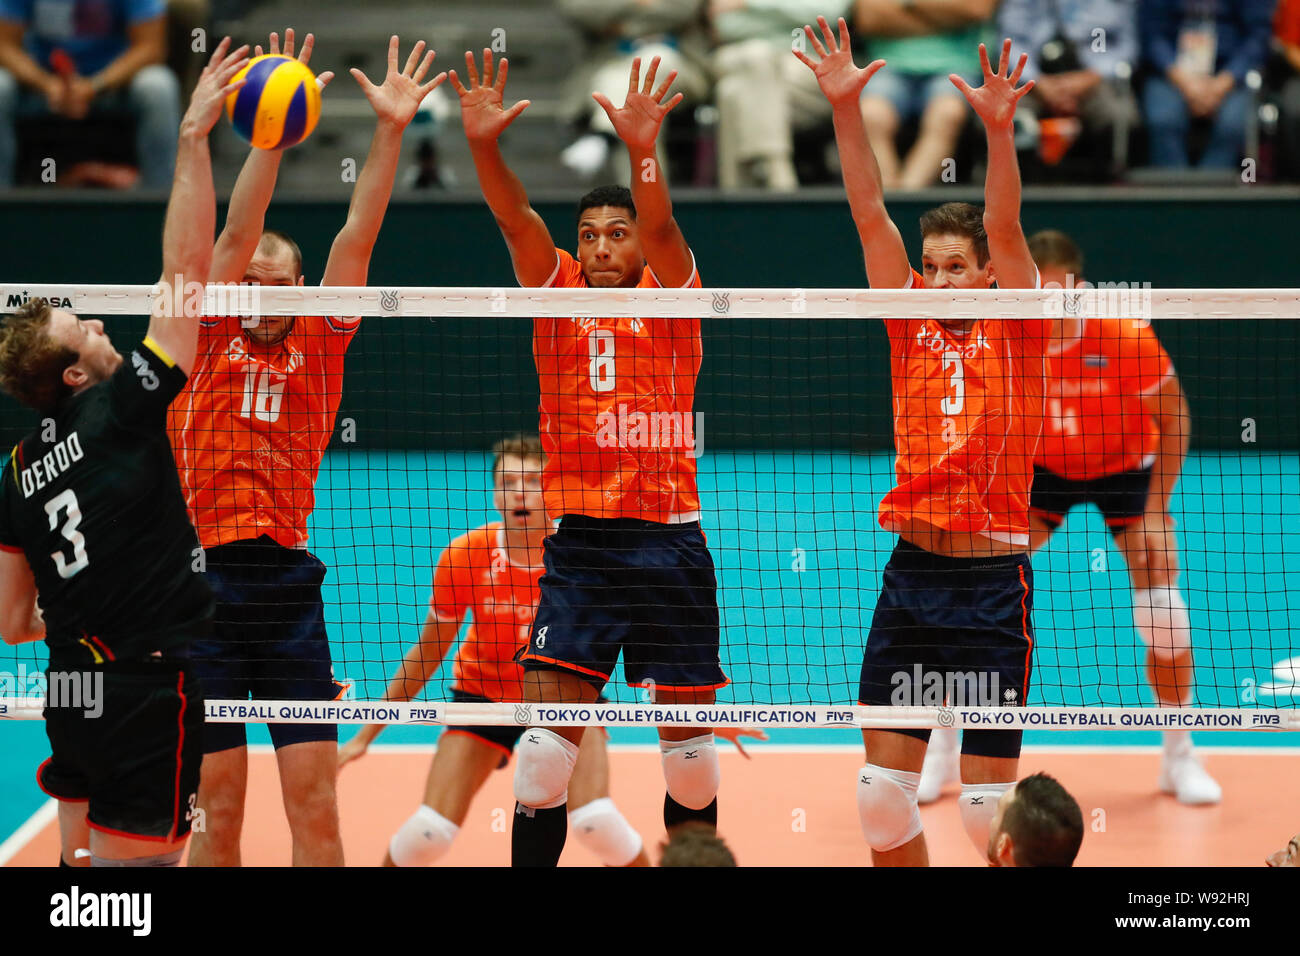 10 augustus 2019 Rotterdam, The Netherlands Tokyo 2020 Volleybal Olympic Qualification Tournament  10-08-2019: Volleybal: OKT Belgie v Nederland: Rotterdam Volleybal OKT Tokyo 2020 Men Rotterdam - Ahoy  L-R Sam Deroo (3) of Belgium, Wouter Ter Maat (16) of The Netherlands, Fabian Plak (8) of The Netherlands, Maarten van Garderen (3) of The Netherlands Stock Photo